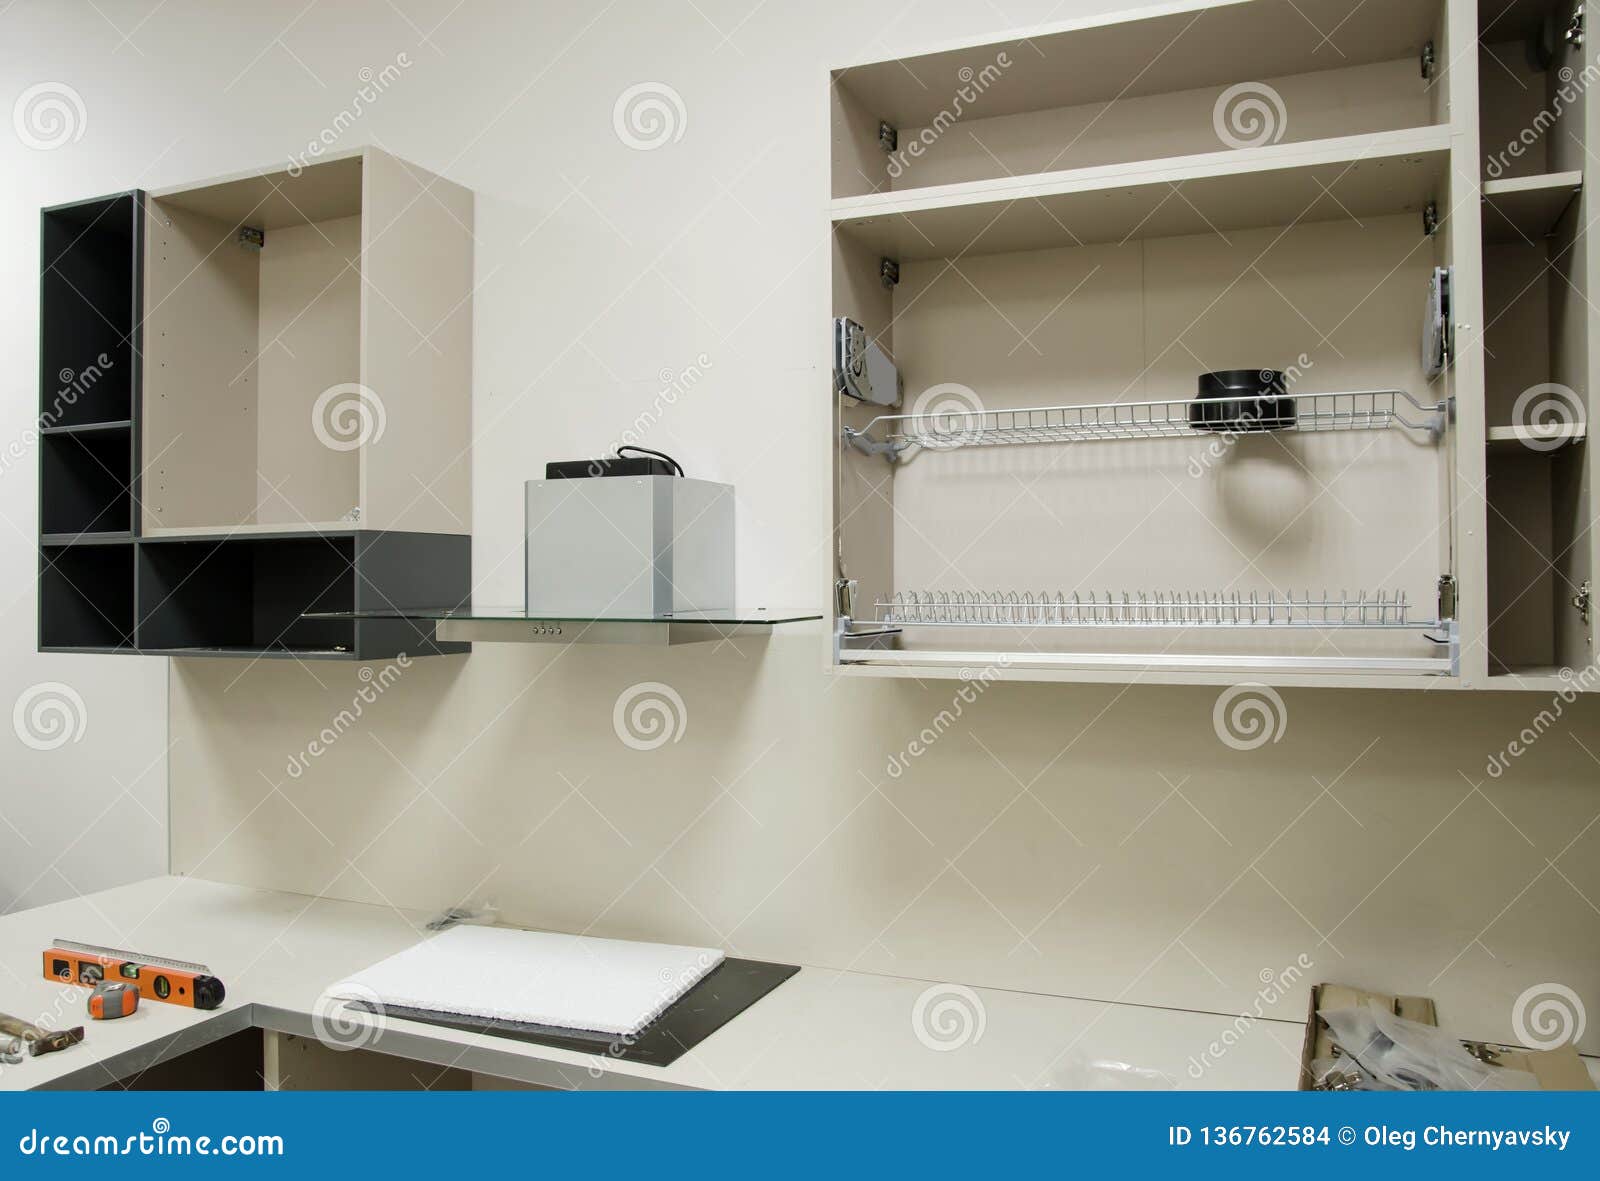 New Open Kitchen Furniture Prepared For Assemble Installation Of Kitchen Furniture By Yourself Stock Photo Image Of Improvement